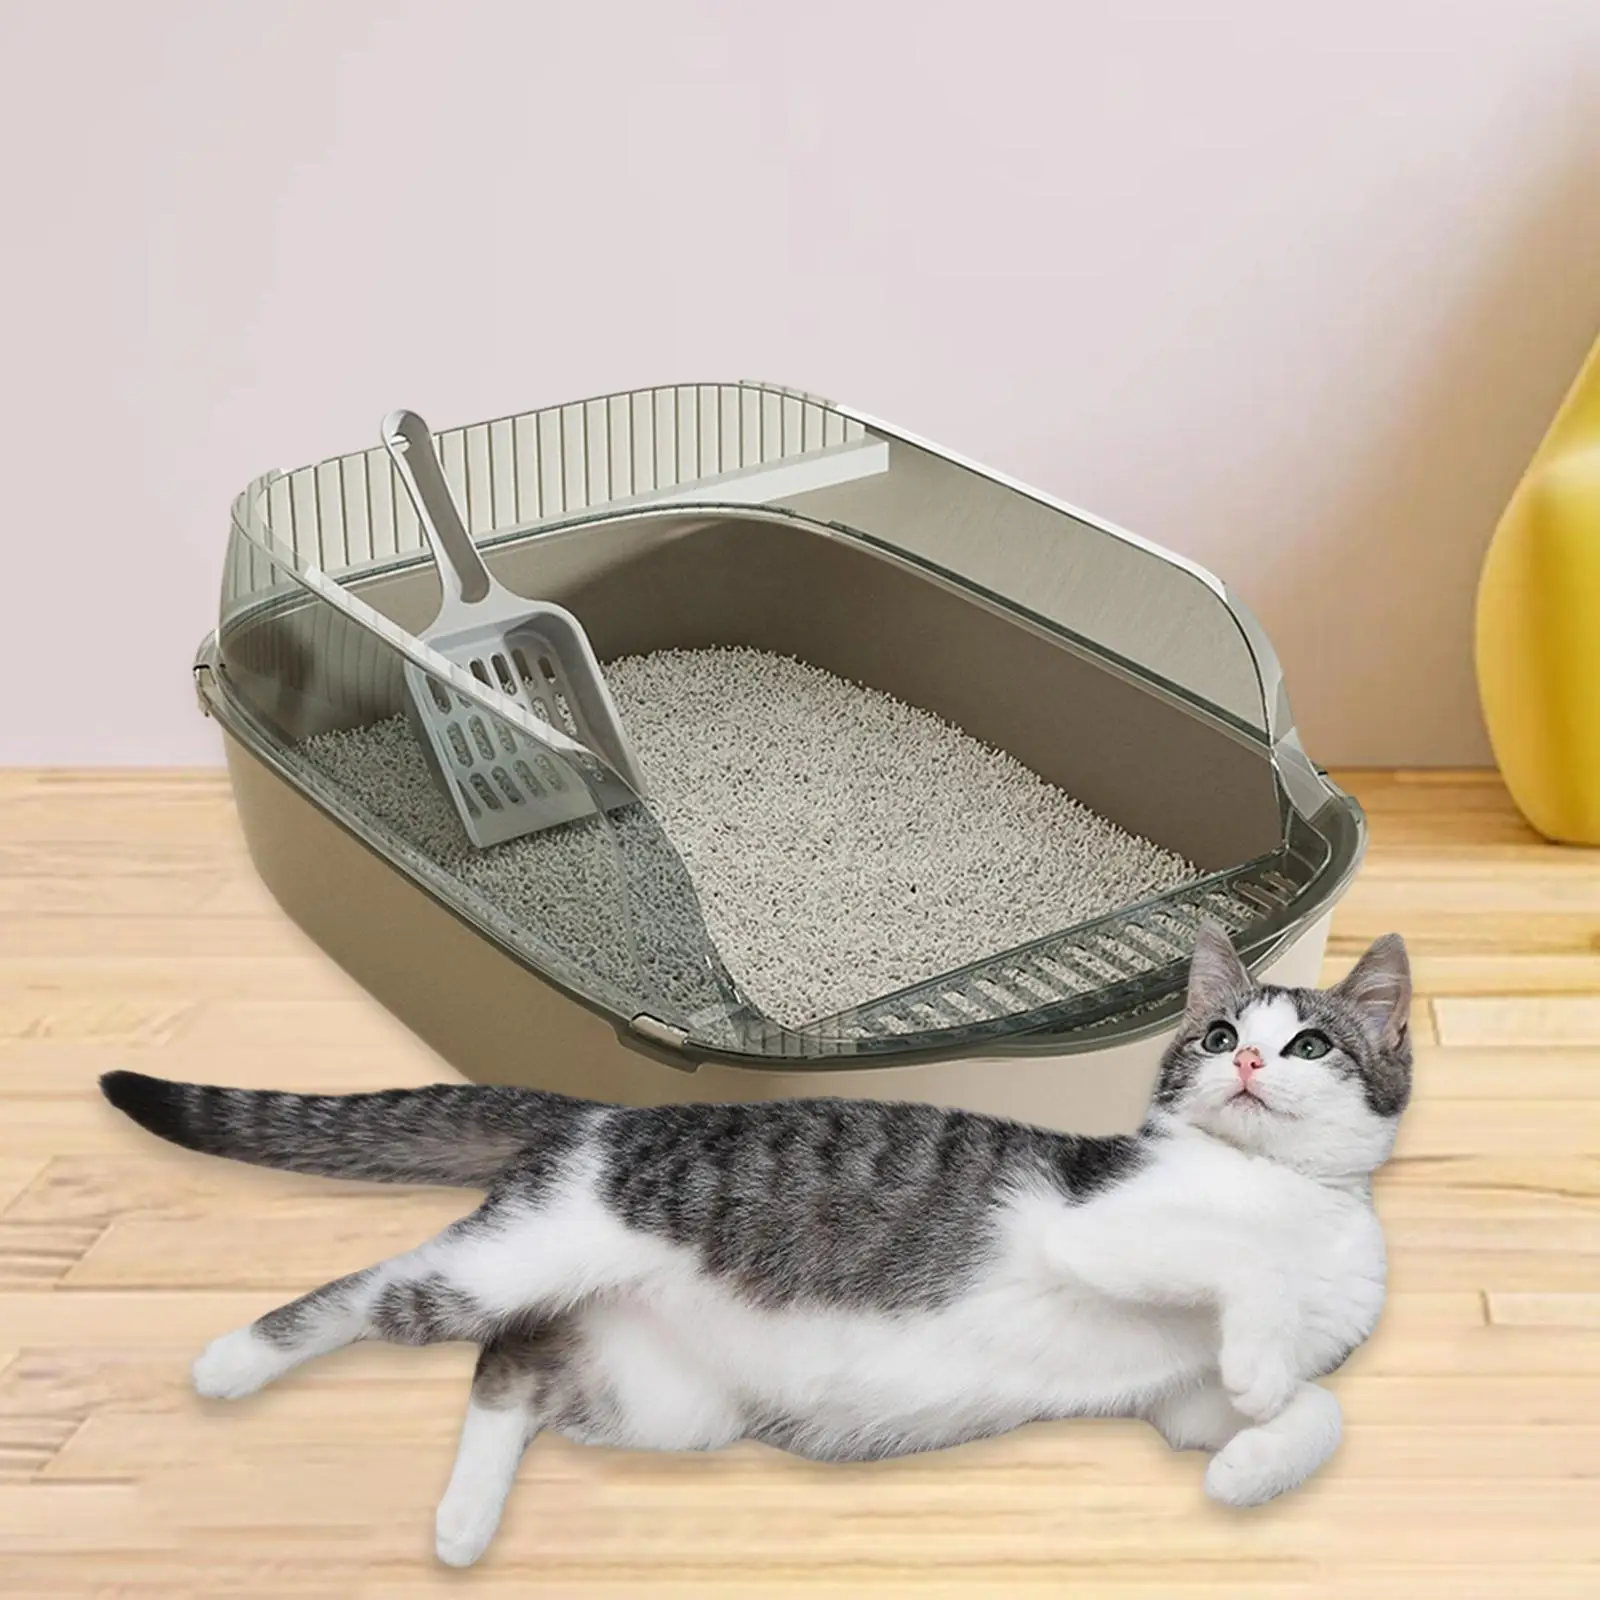 Pets Litter Trays Bedpan Easy to Clean Cats Litter Box Potty Toilet for Hamsters Small and Medium Cats Kitten Small Animal Bunny